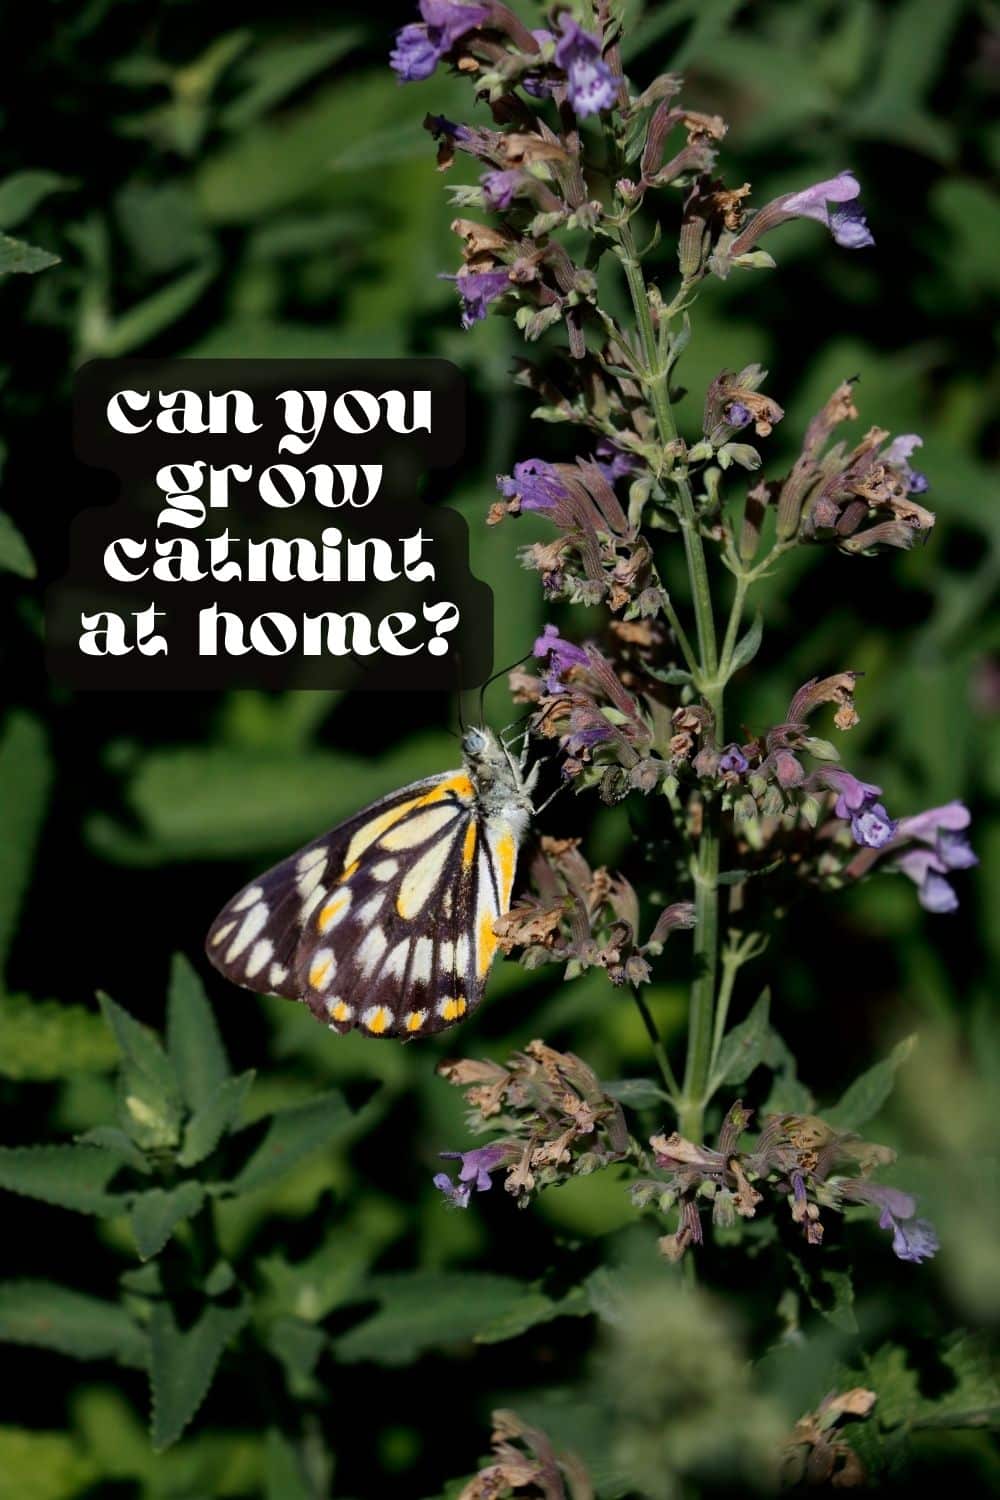 If you're looking for an easy and low-maintenance plant, catmint is an excellent choice. After all, who doesn't love a plant that will bloom for months, attract pollinators, AND is drought tolerant? Once you know how to grow catmint, you'll be surprised at how resilient and versatile this hardy perennial herb truly is.